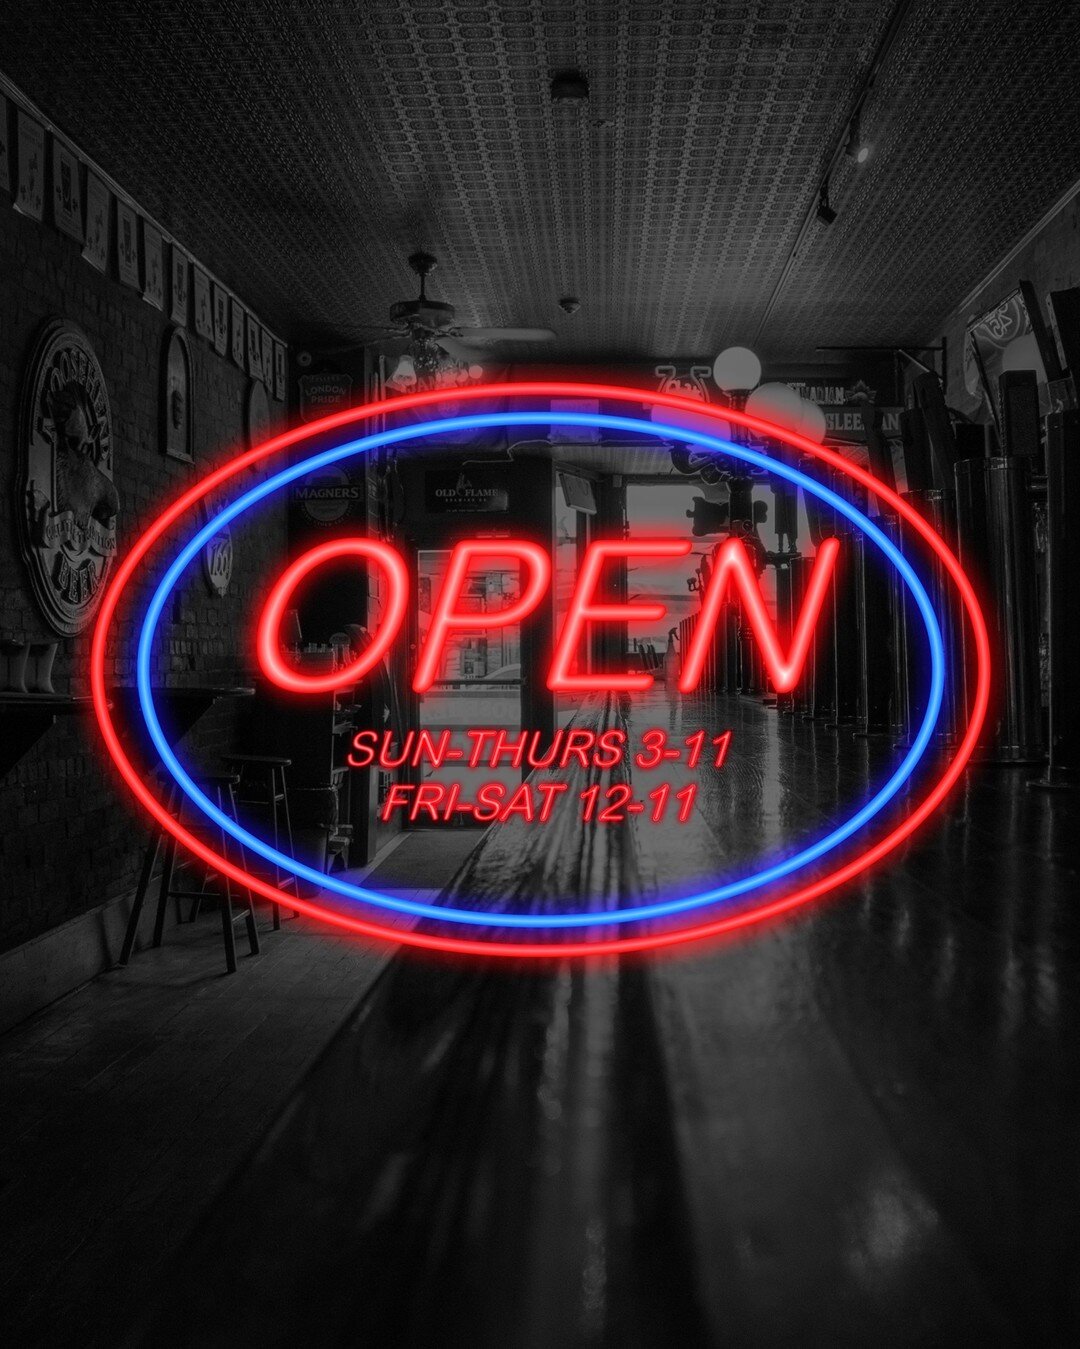 🚨🚨🚨OPEN TODAY AT 3PM🚨🚨🚨

We will be open the following hours going forward:

SUN - THURS 	3-11
FRI - SAT 12-11

We will still be doing takeout for food and alcohol through our website